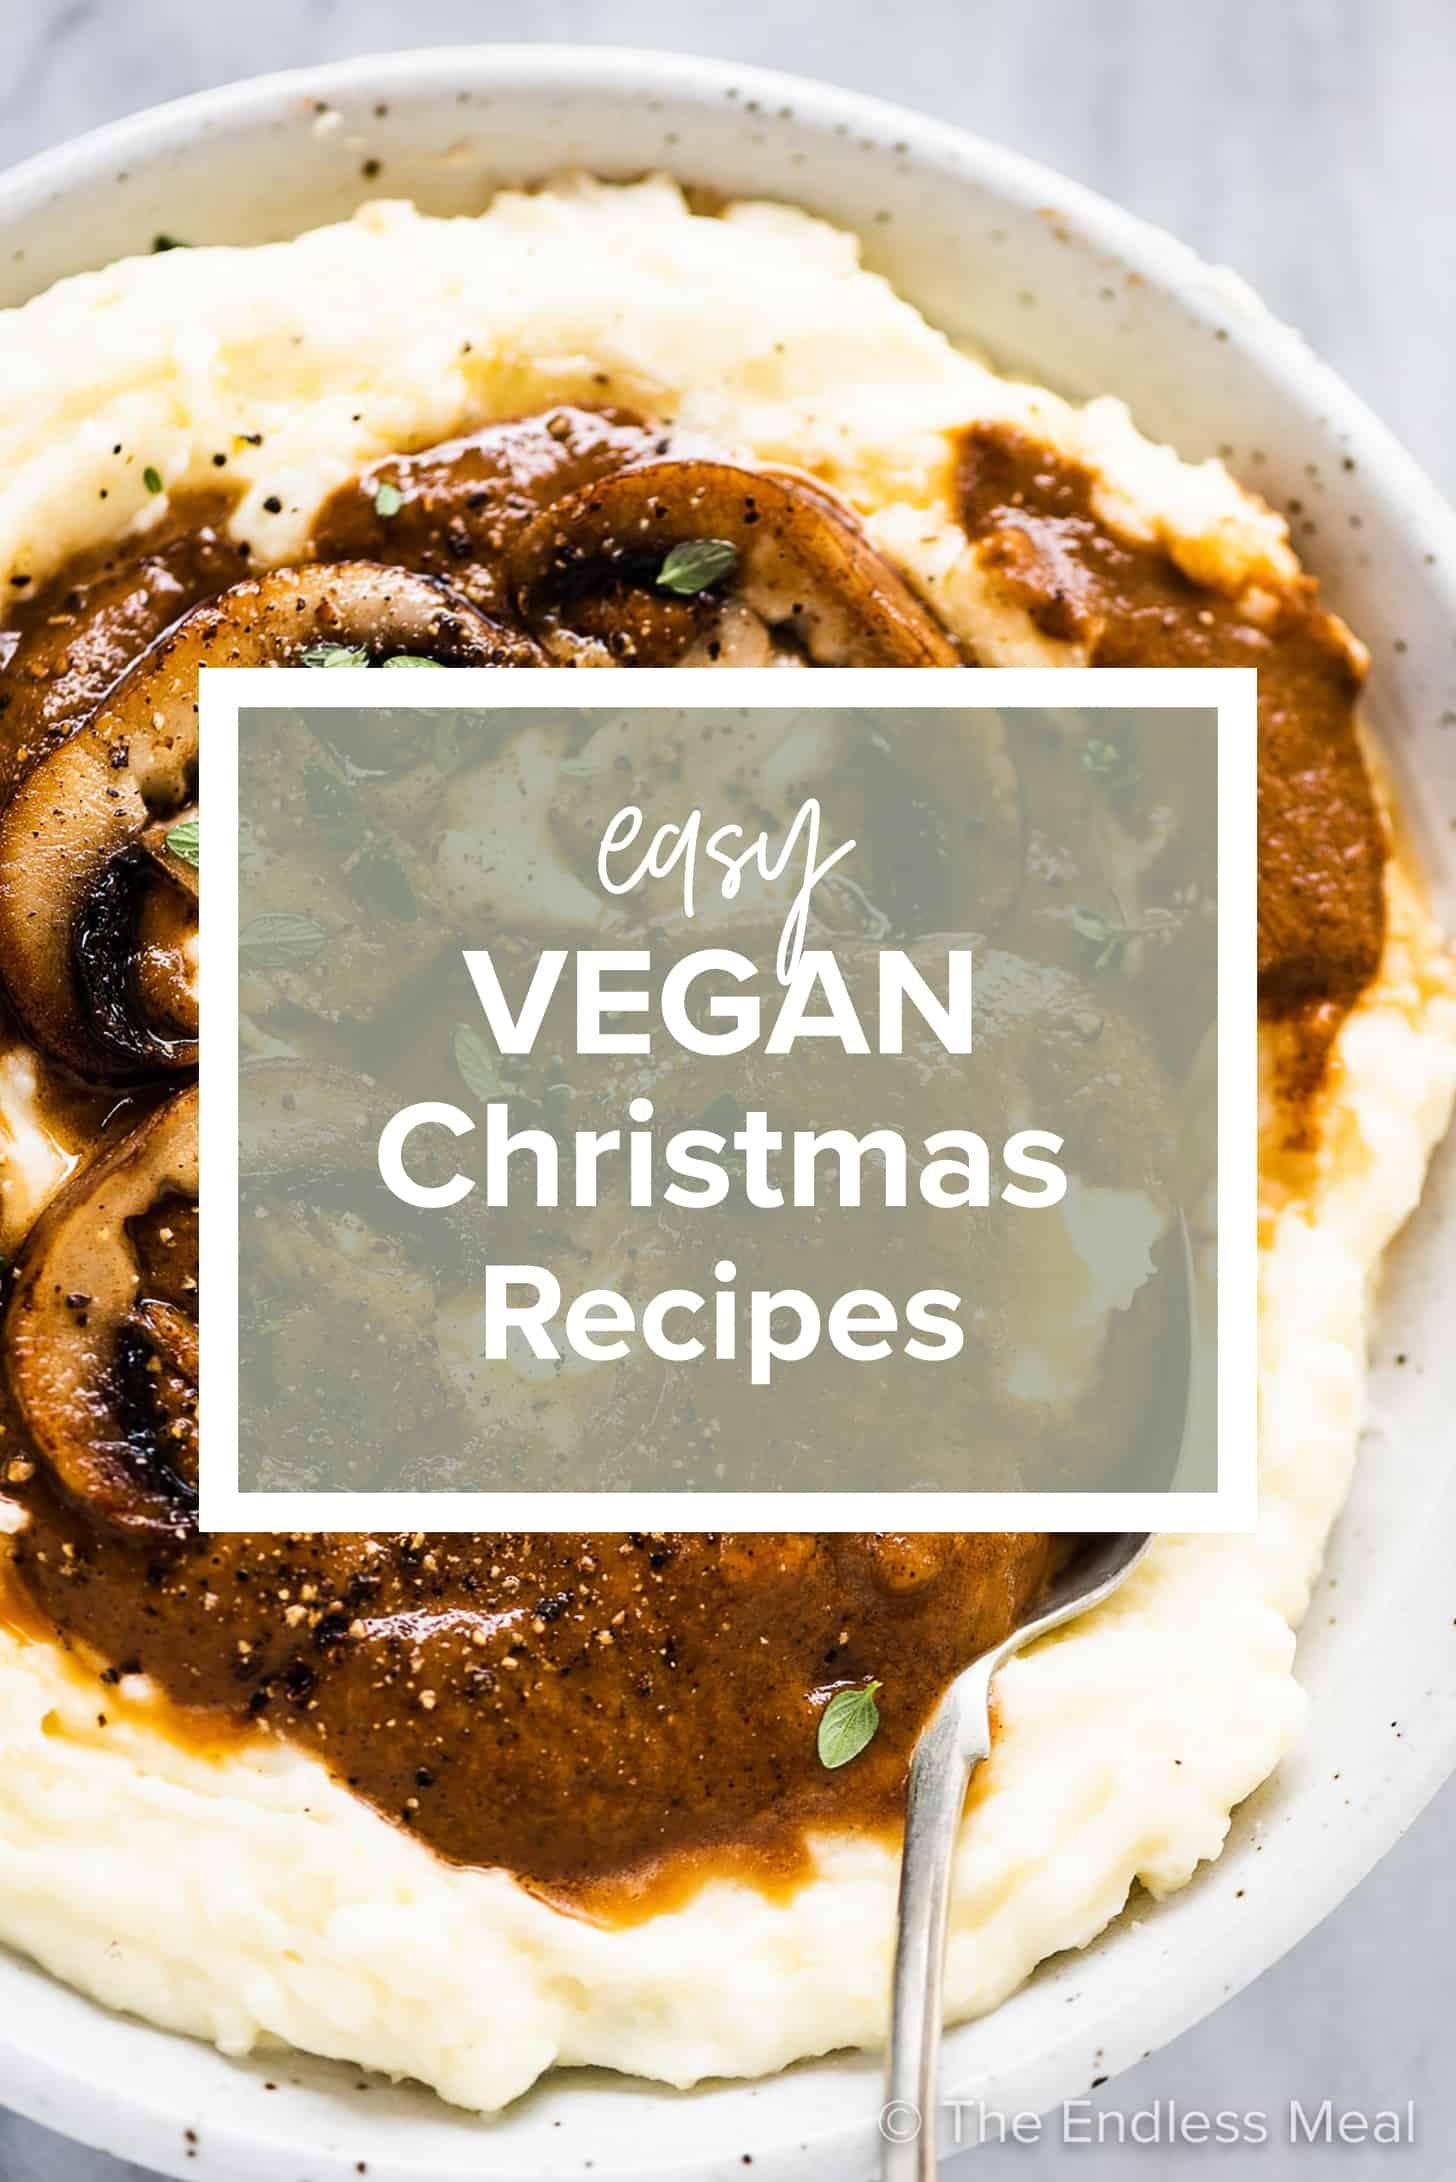 10 Mouthwatering Vegan Christmas Recipes for a Festive Feast